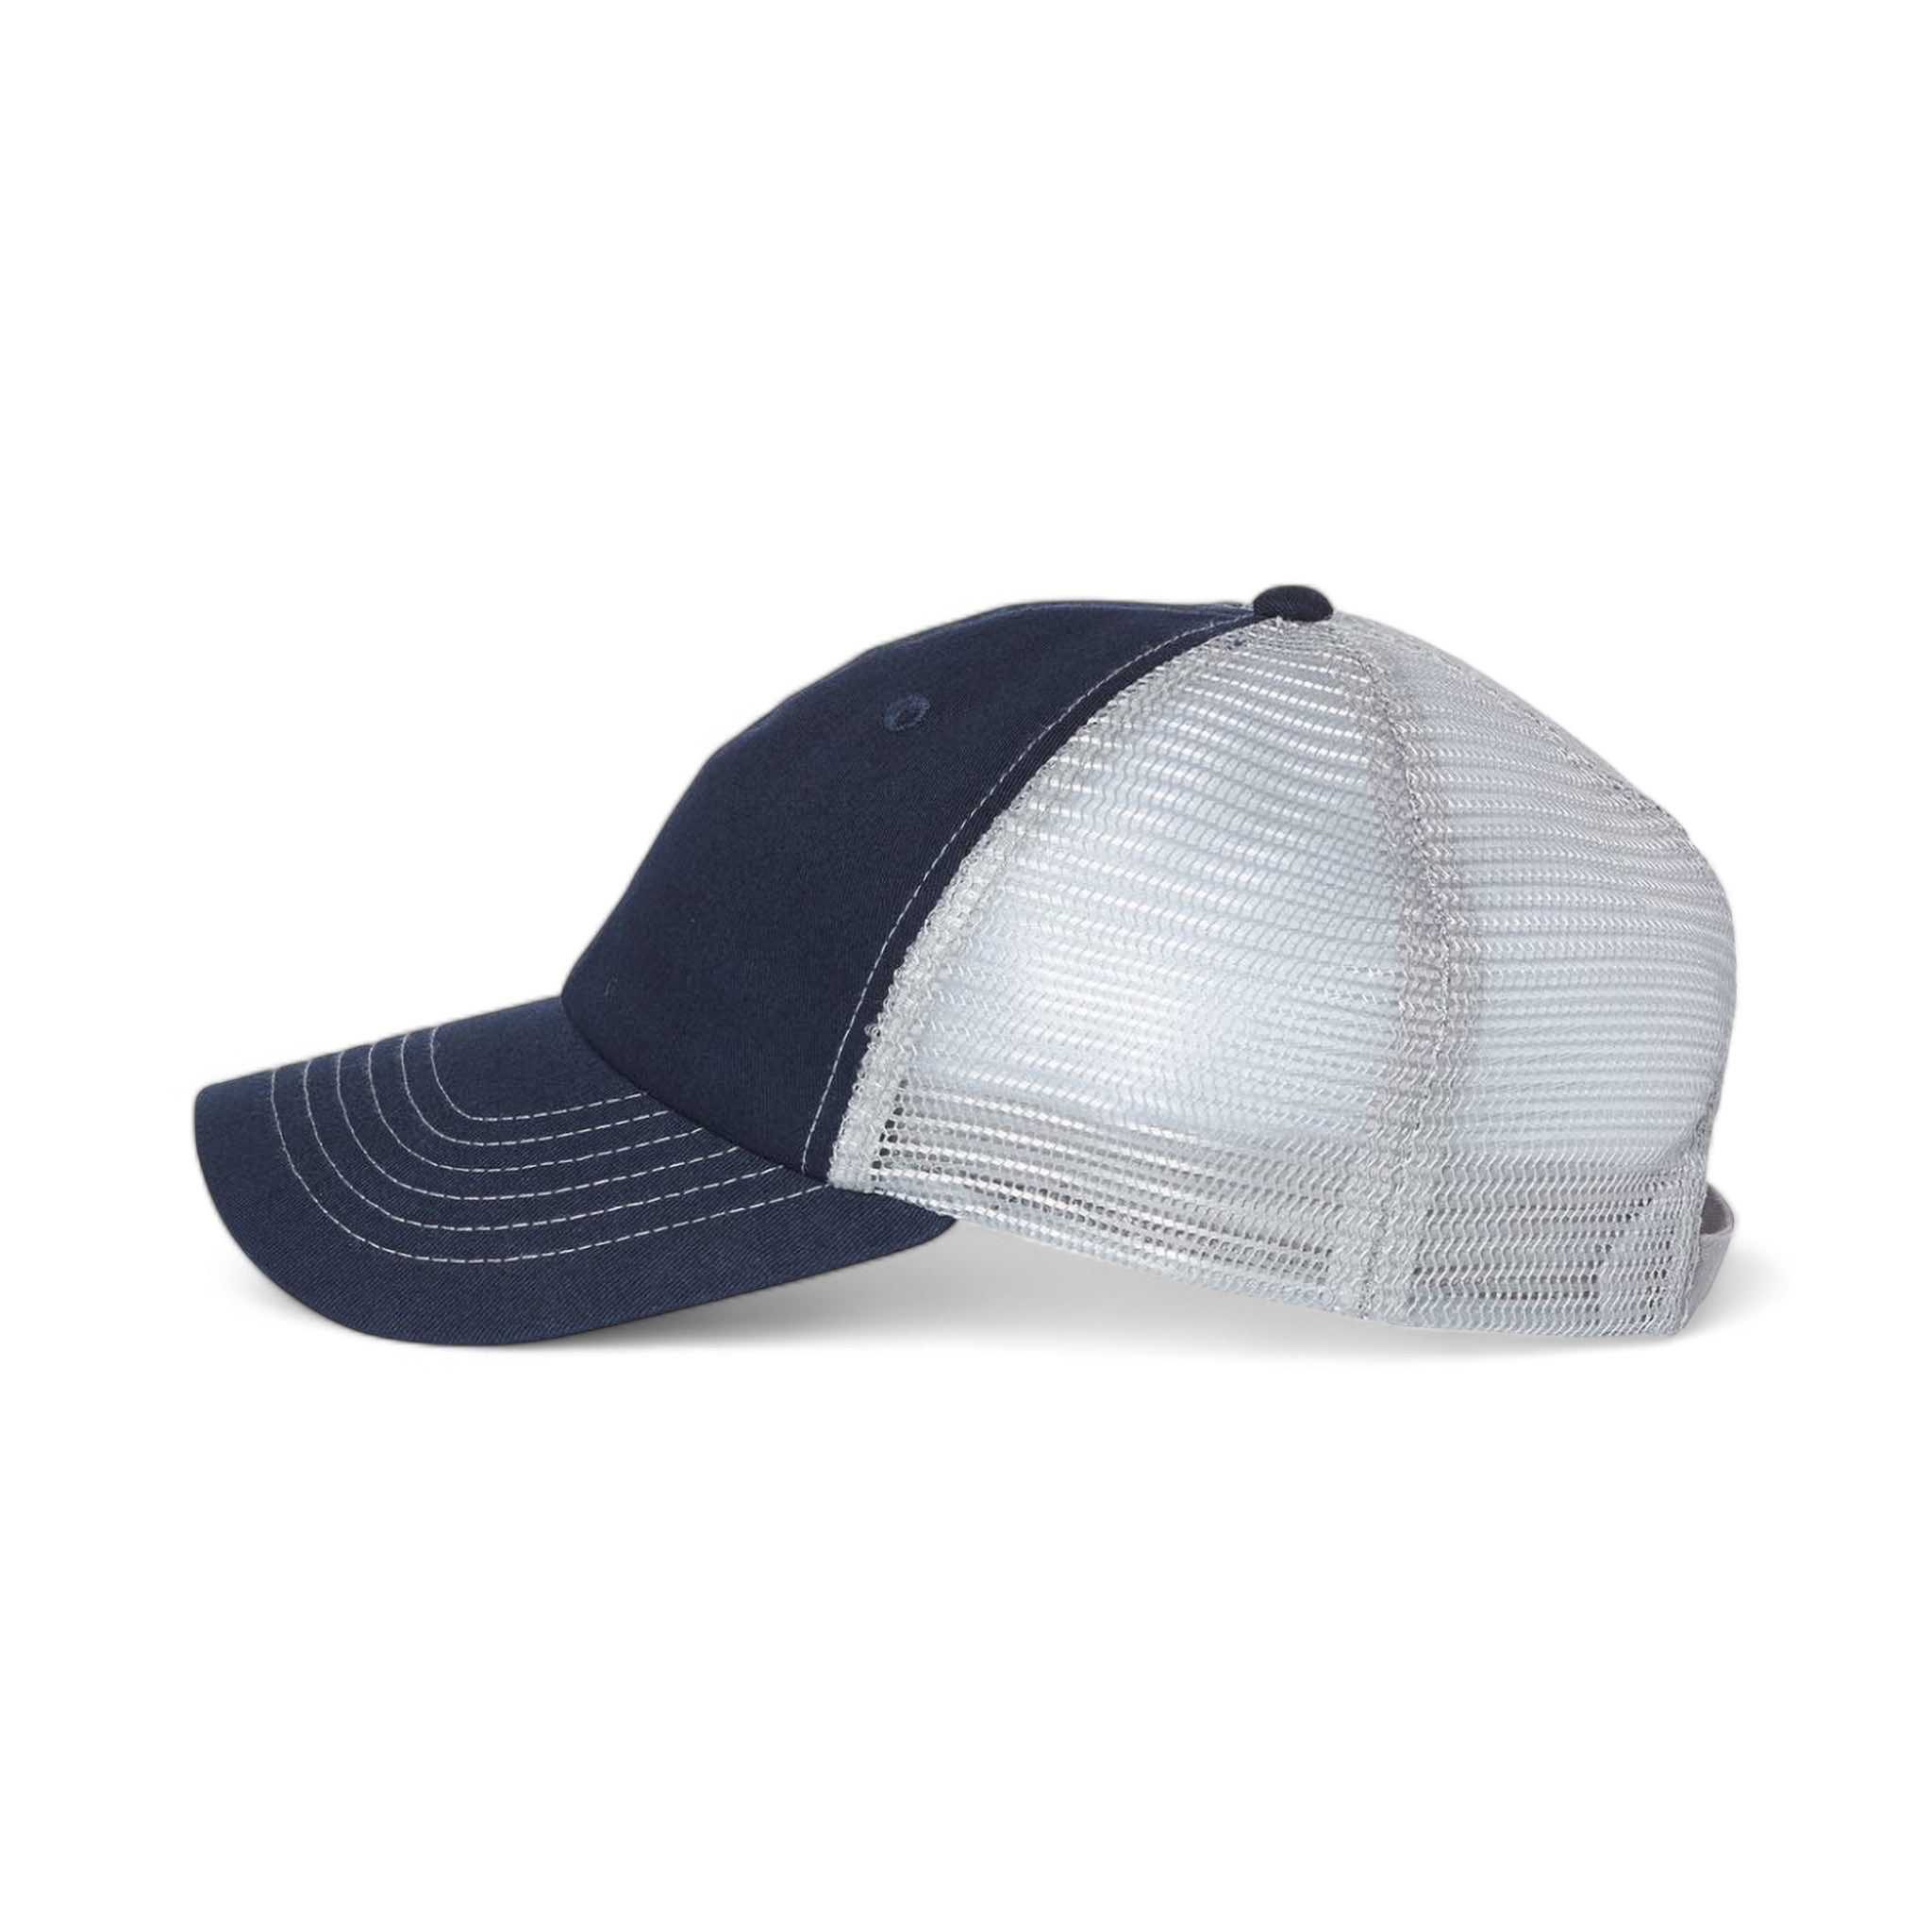 Side view of Sportsman 3100 custom hat in navy and grey